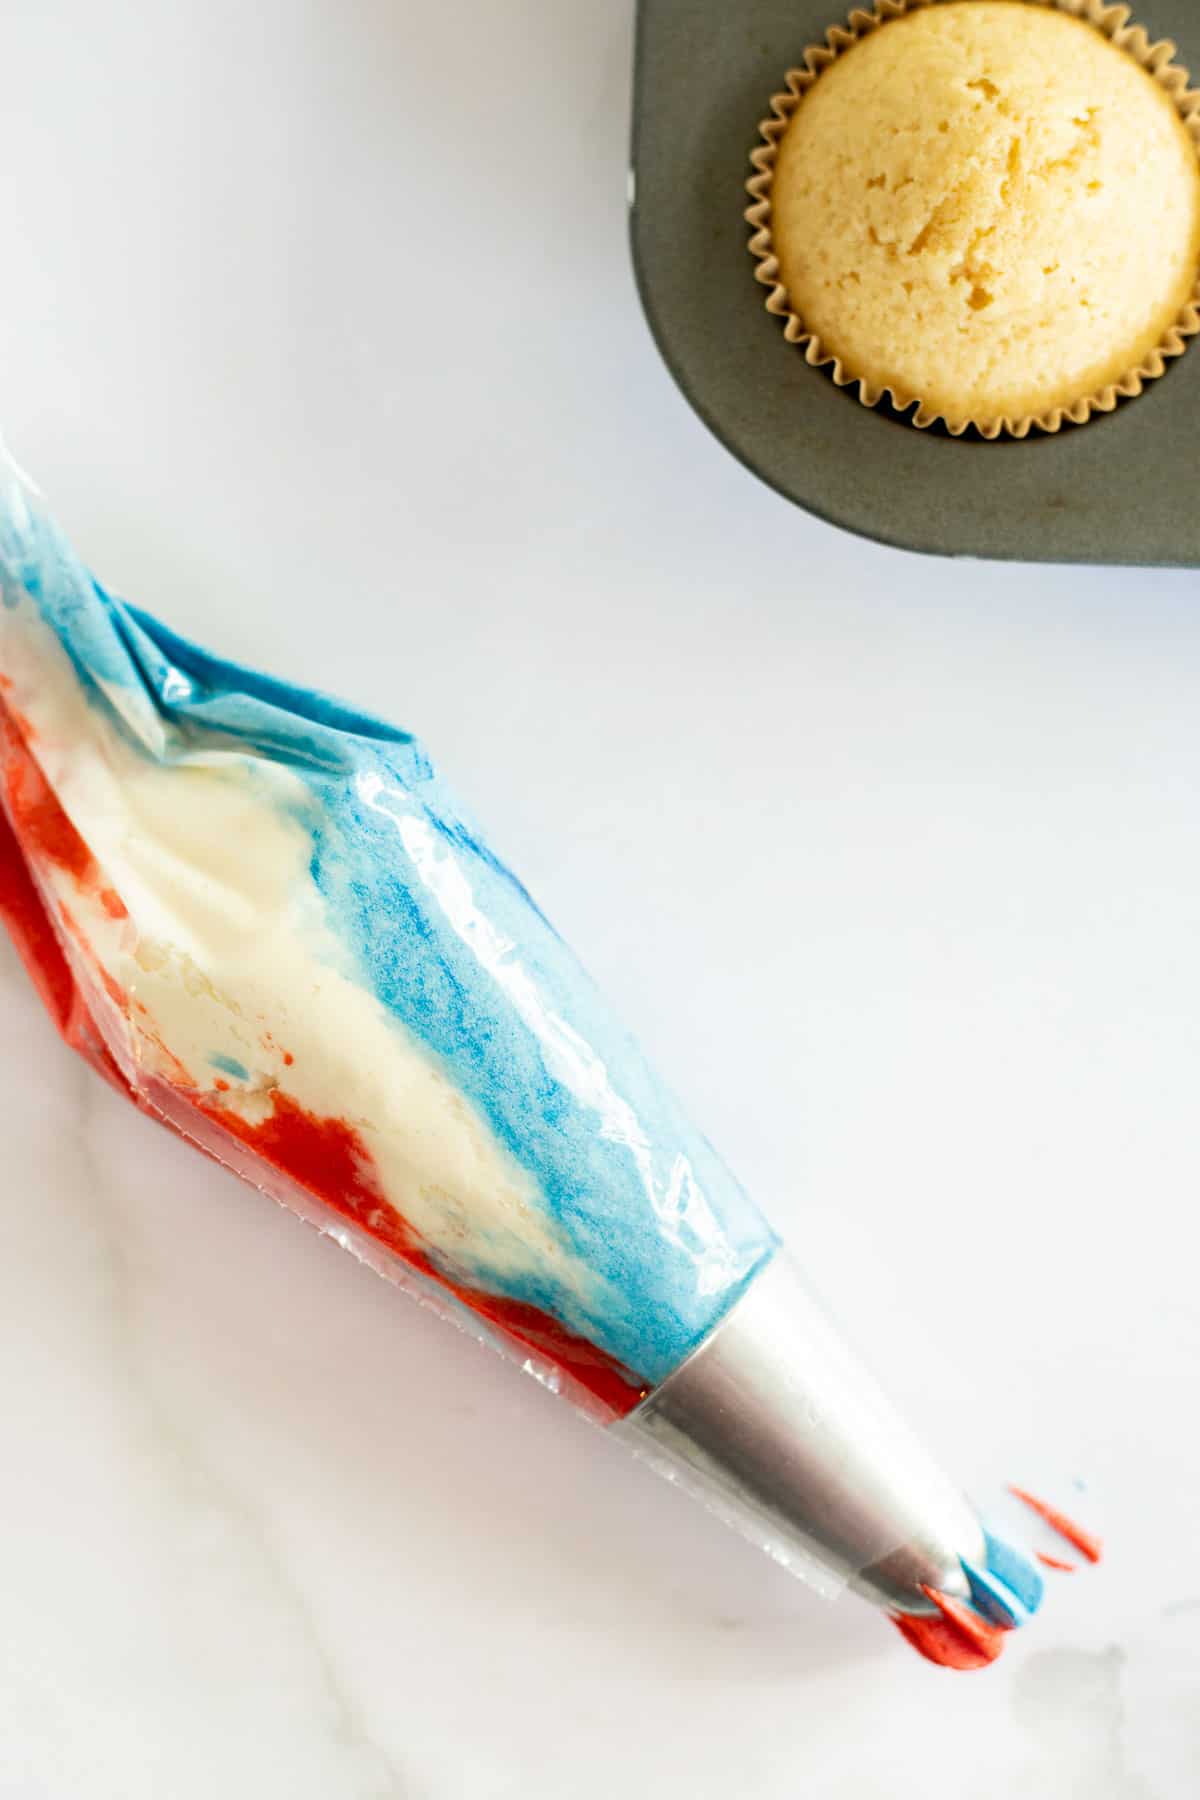 red, white, and blue frosting in a piping bag.